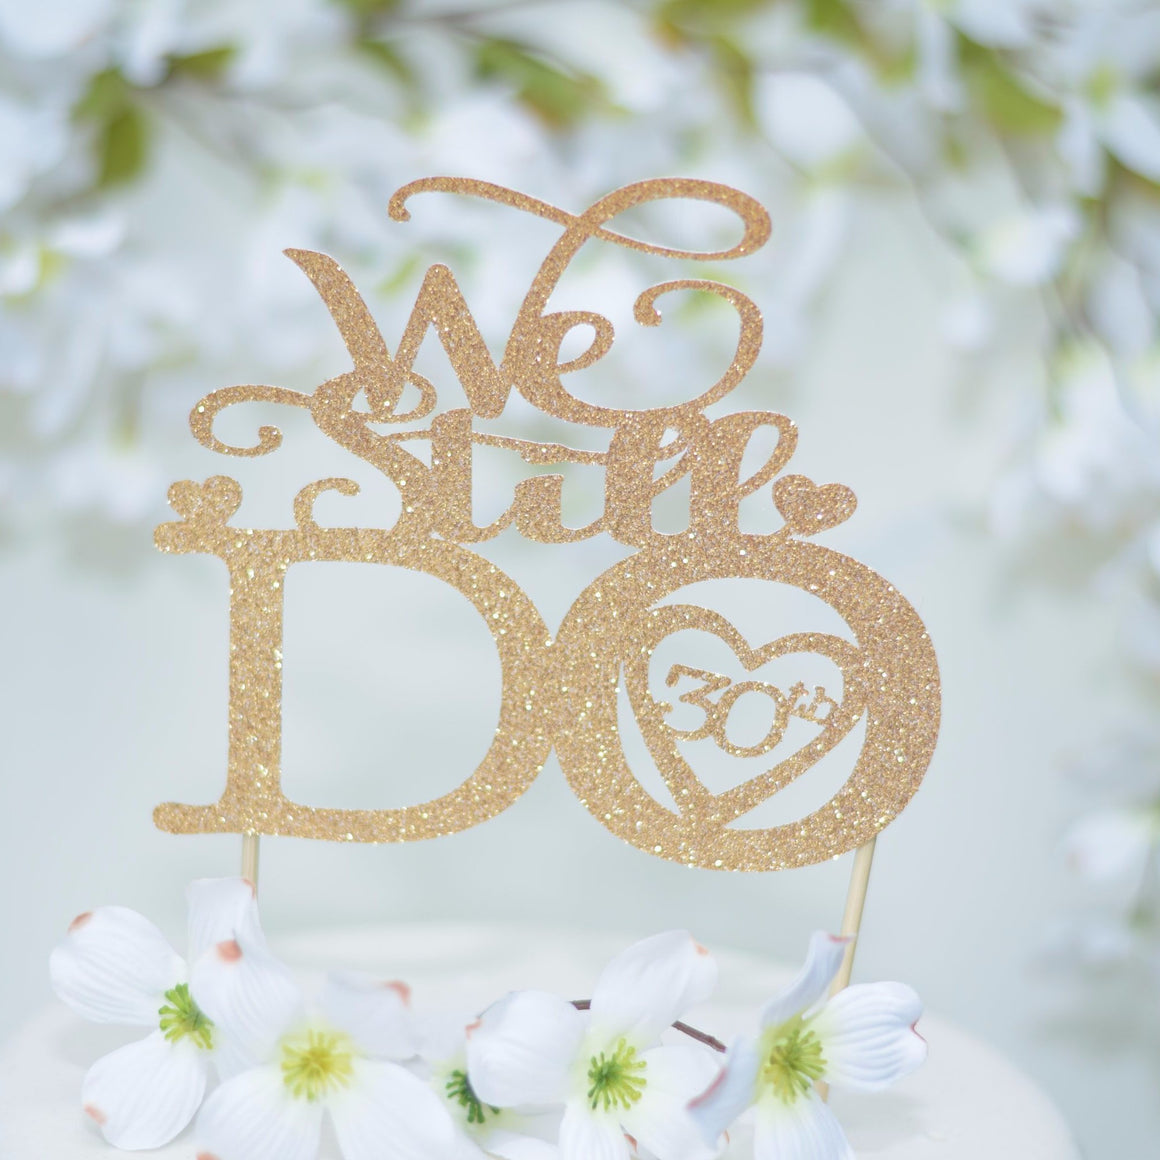 We Still Do 30th Anniversary Cake Topper in Gold Glitter font on a white wedding cake with floral background